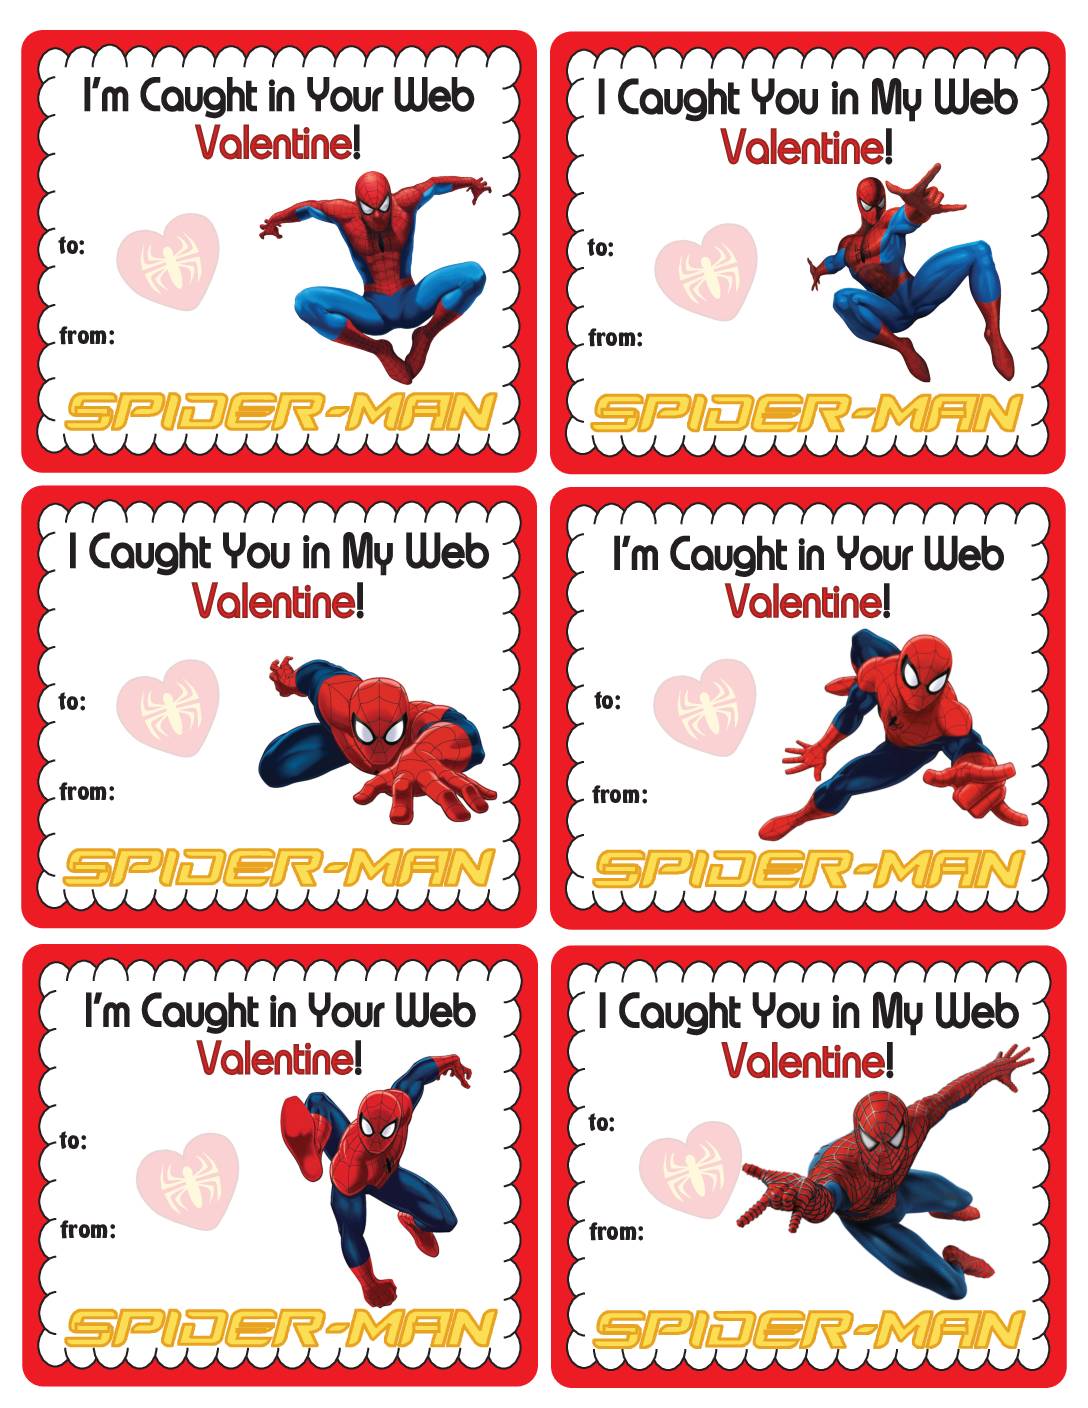 hallmark-spider-man-valentines-day-card-for-significant-other-clip